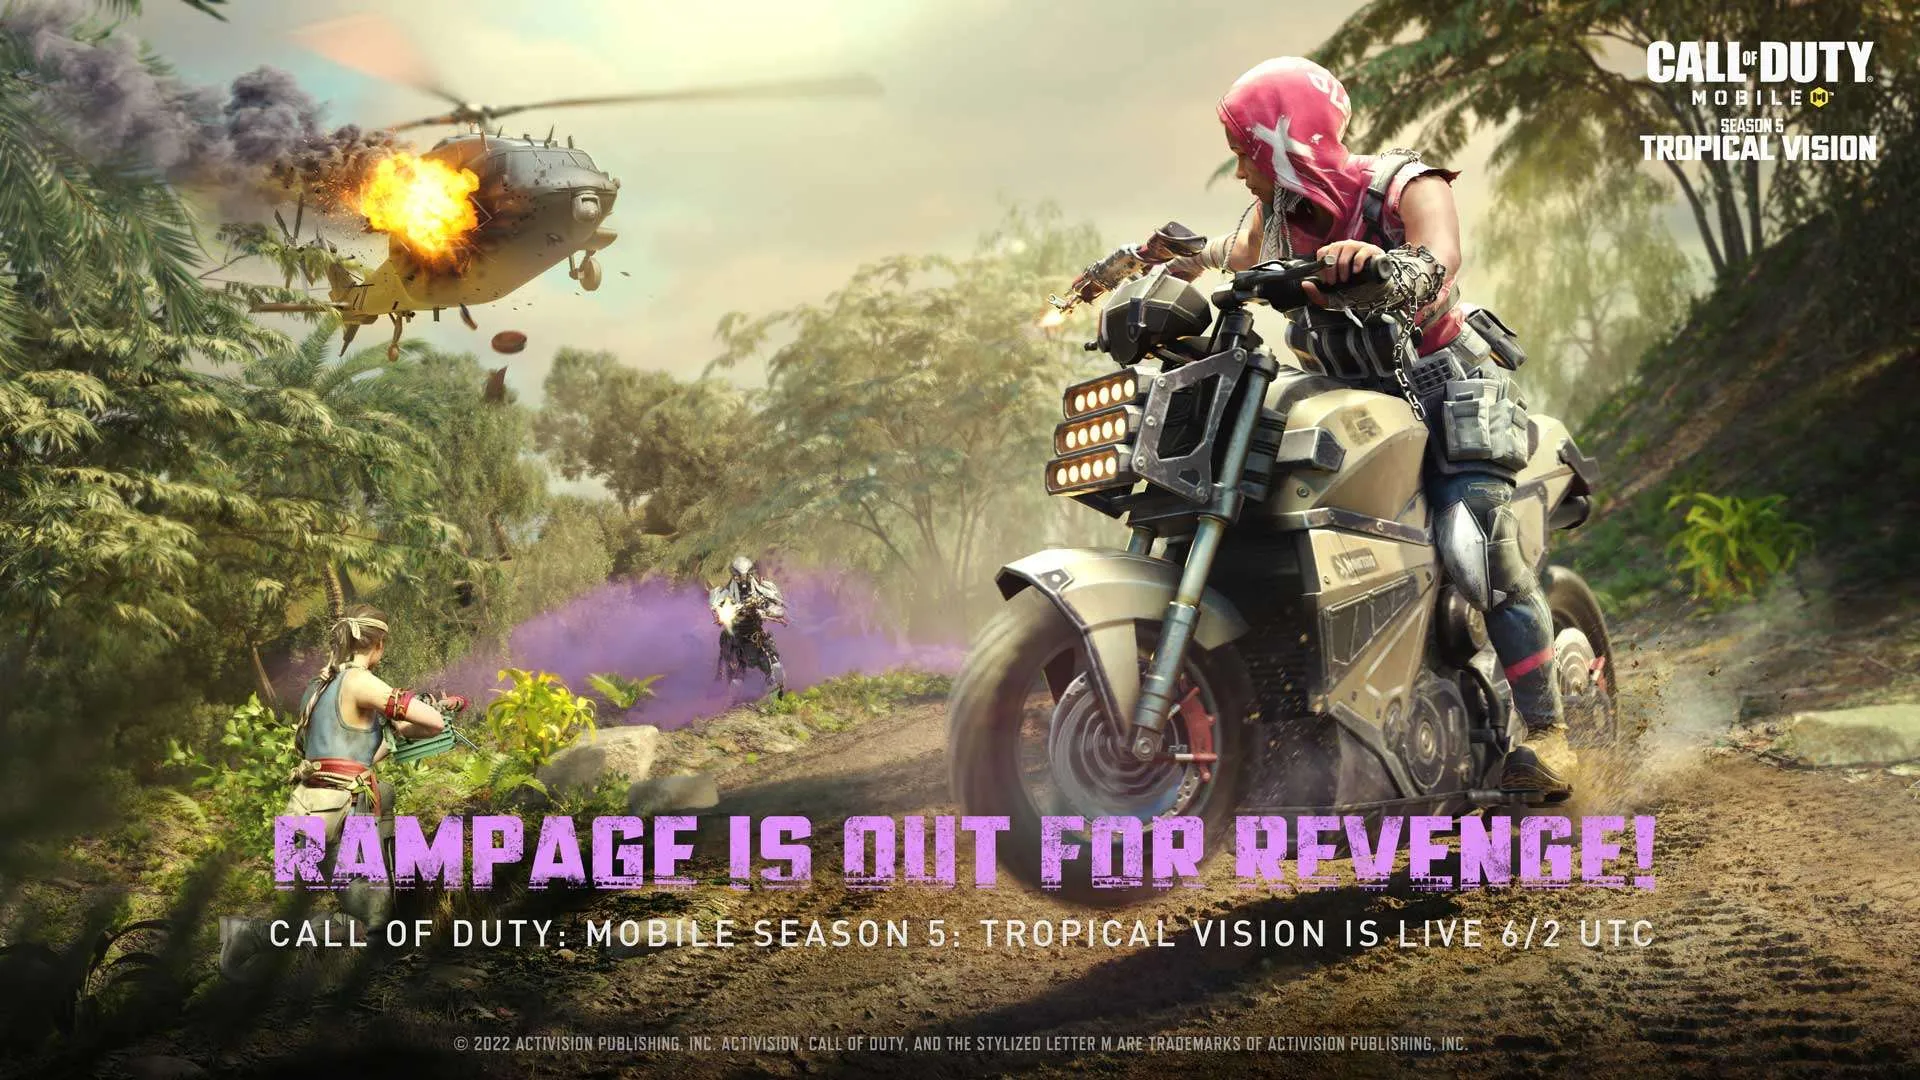 Call of Duty Mobile Season 5: Tropical Vision launches June 1